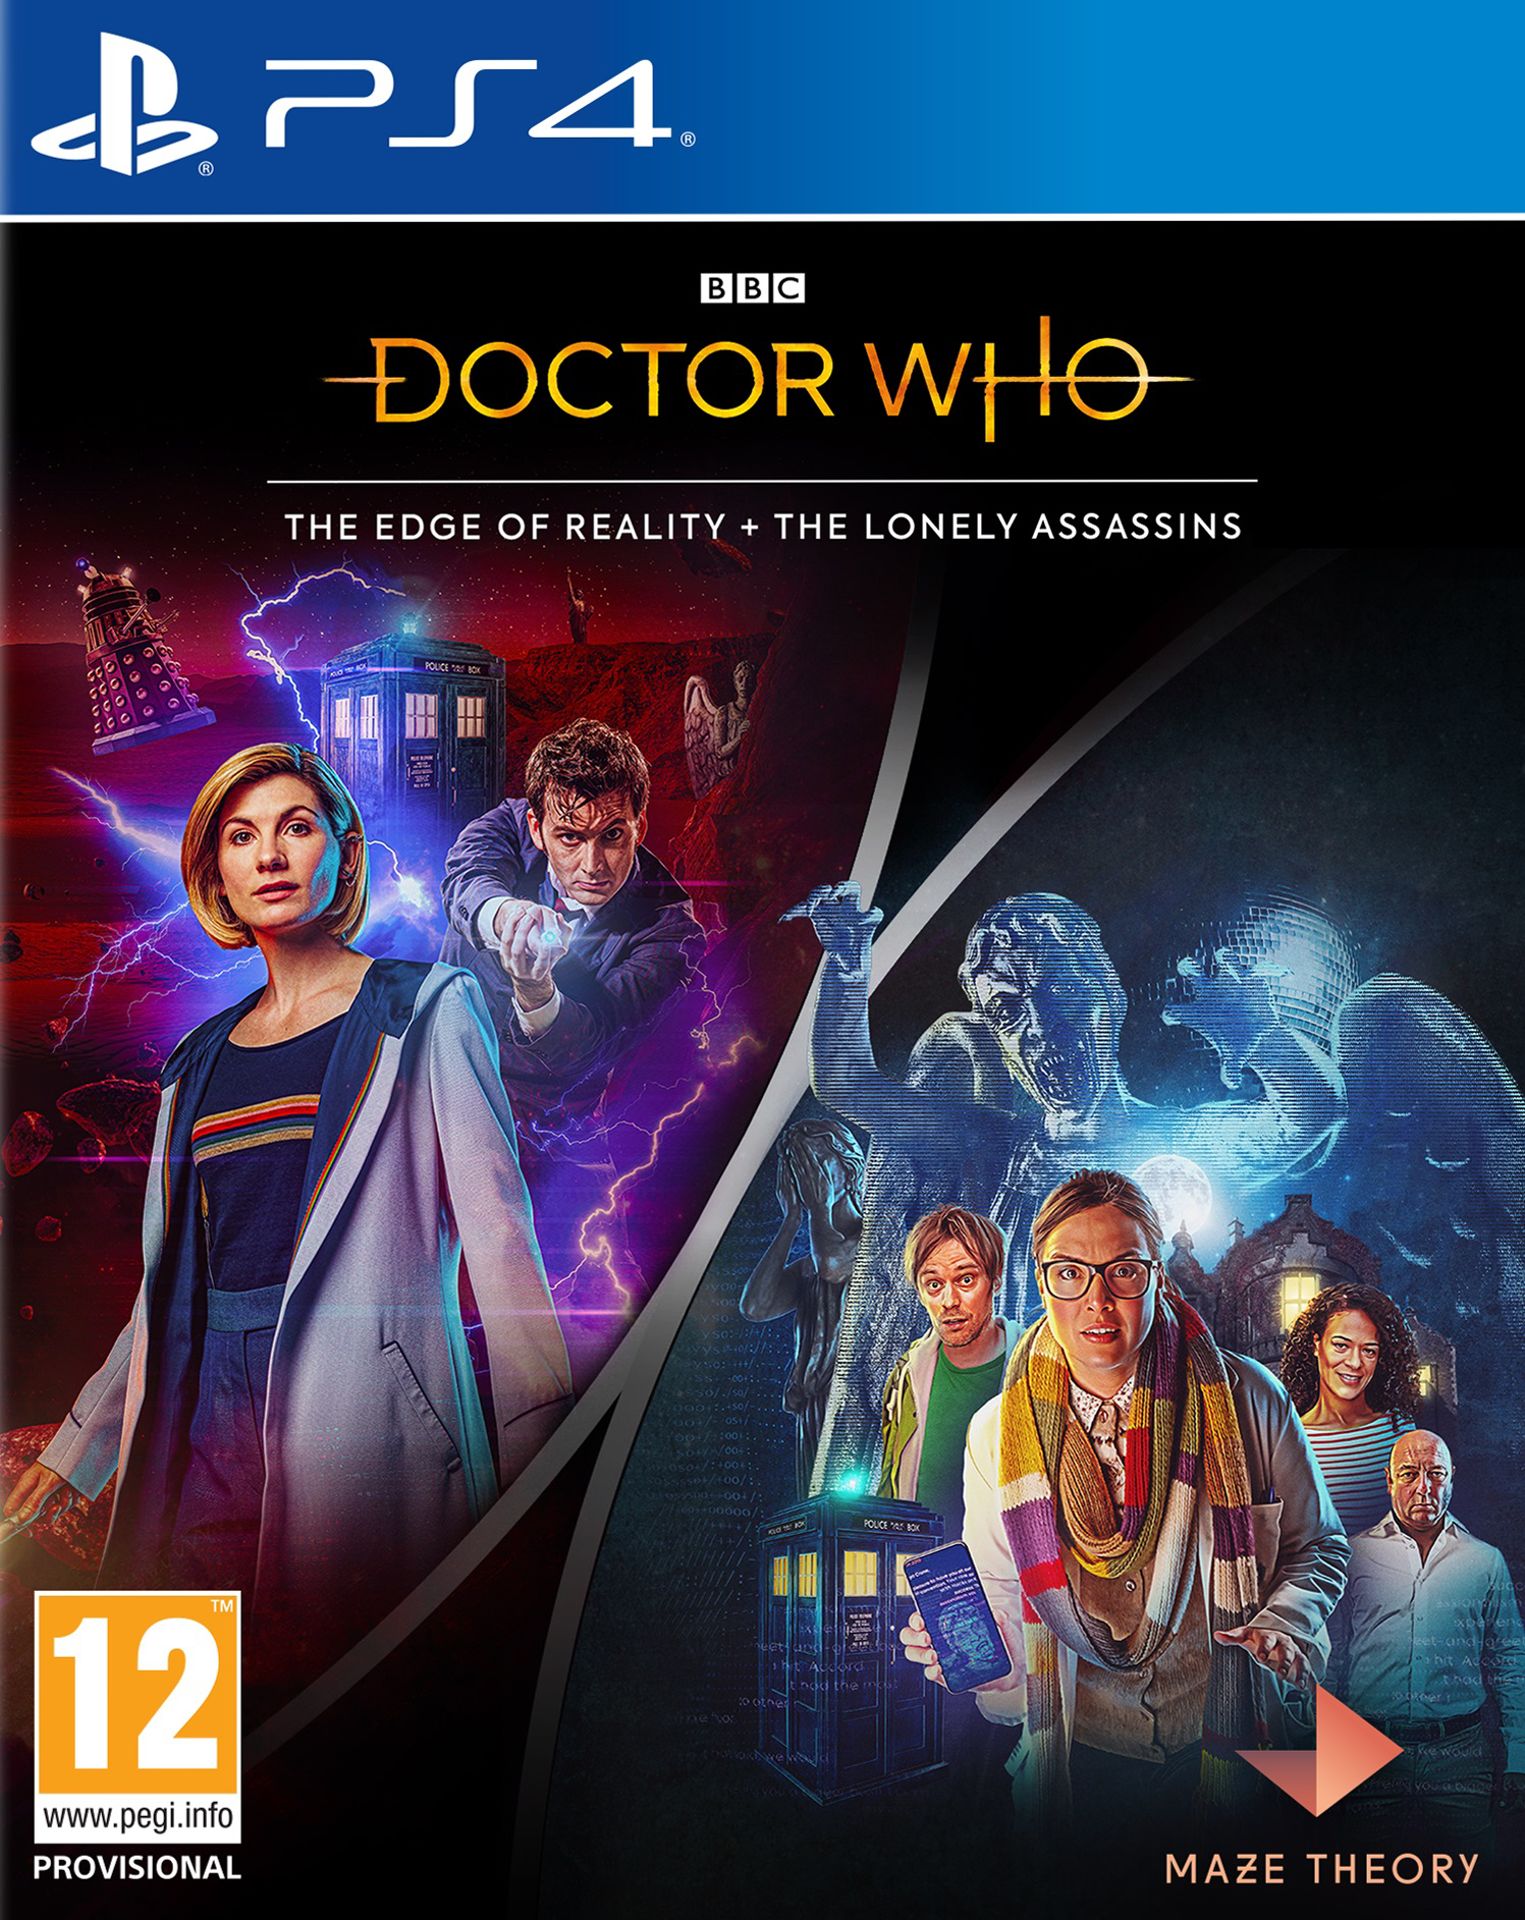 Doctor Who - Duo Bundle (The Edge of Reality + The Lonely Assass